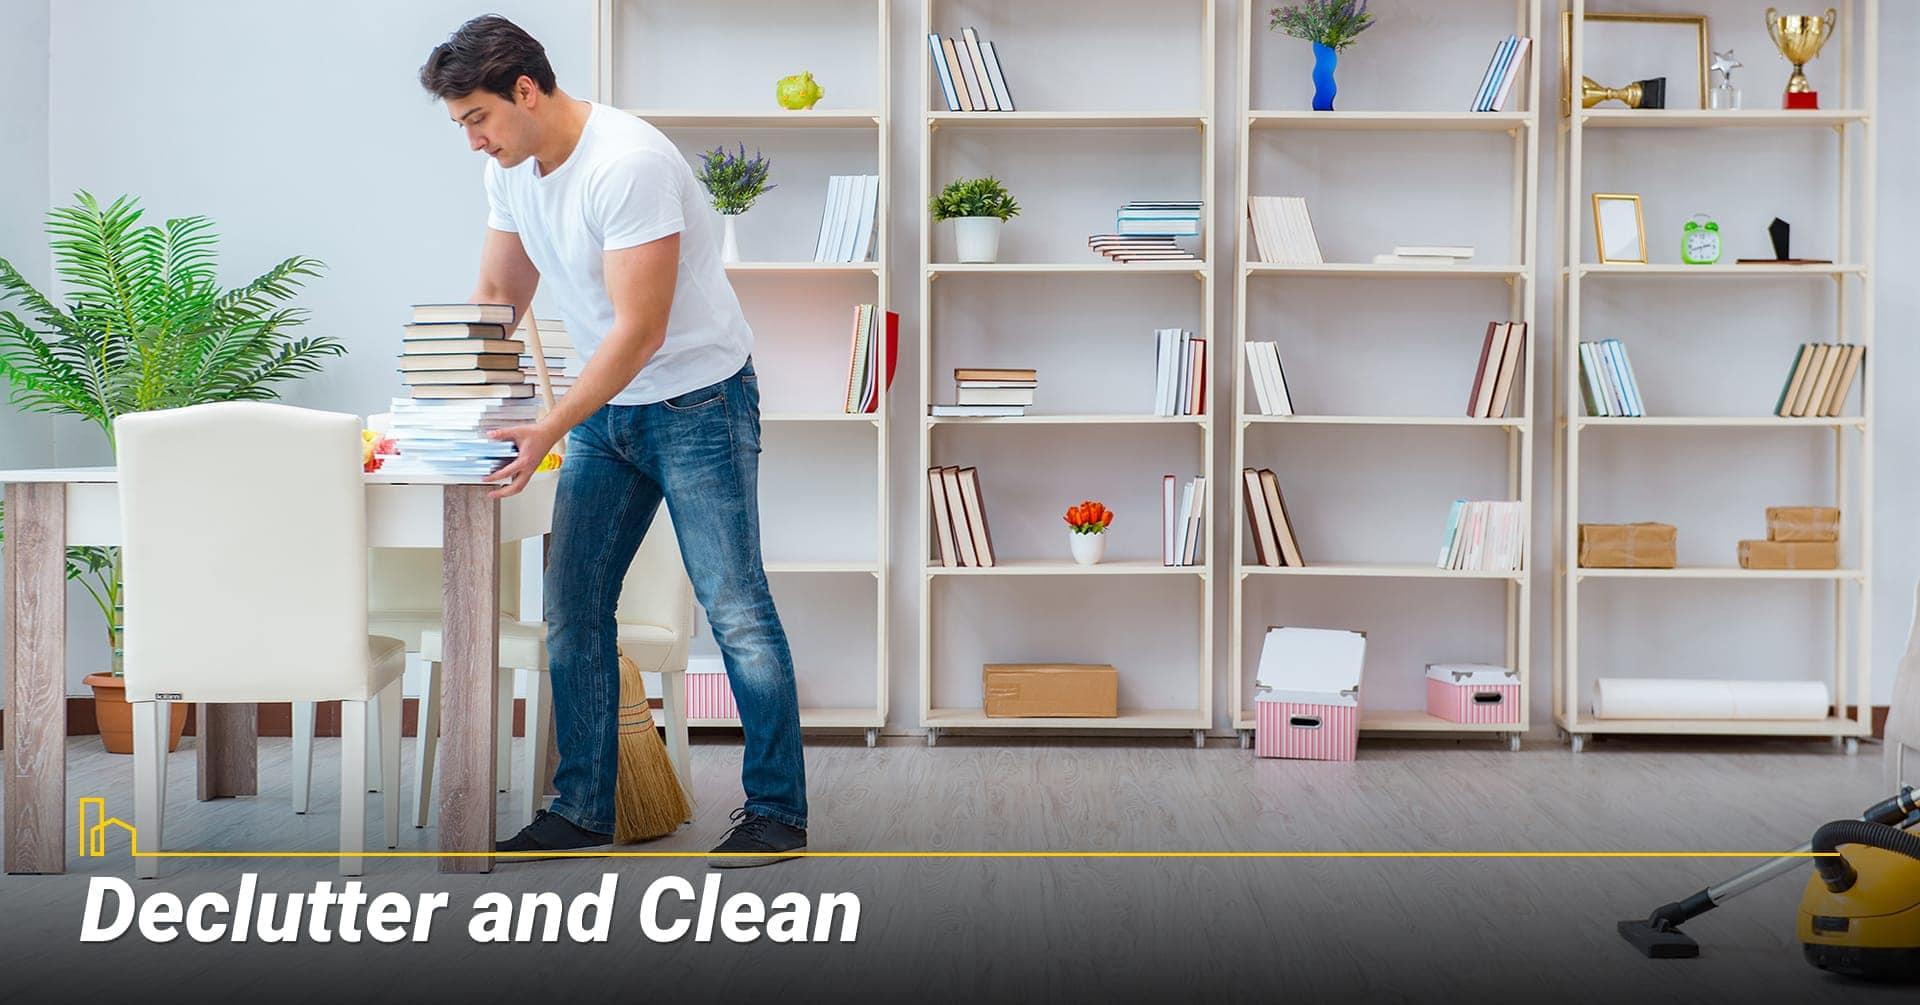 Declutter and Clean, reorganize your rooms